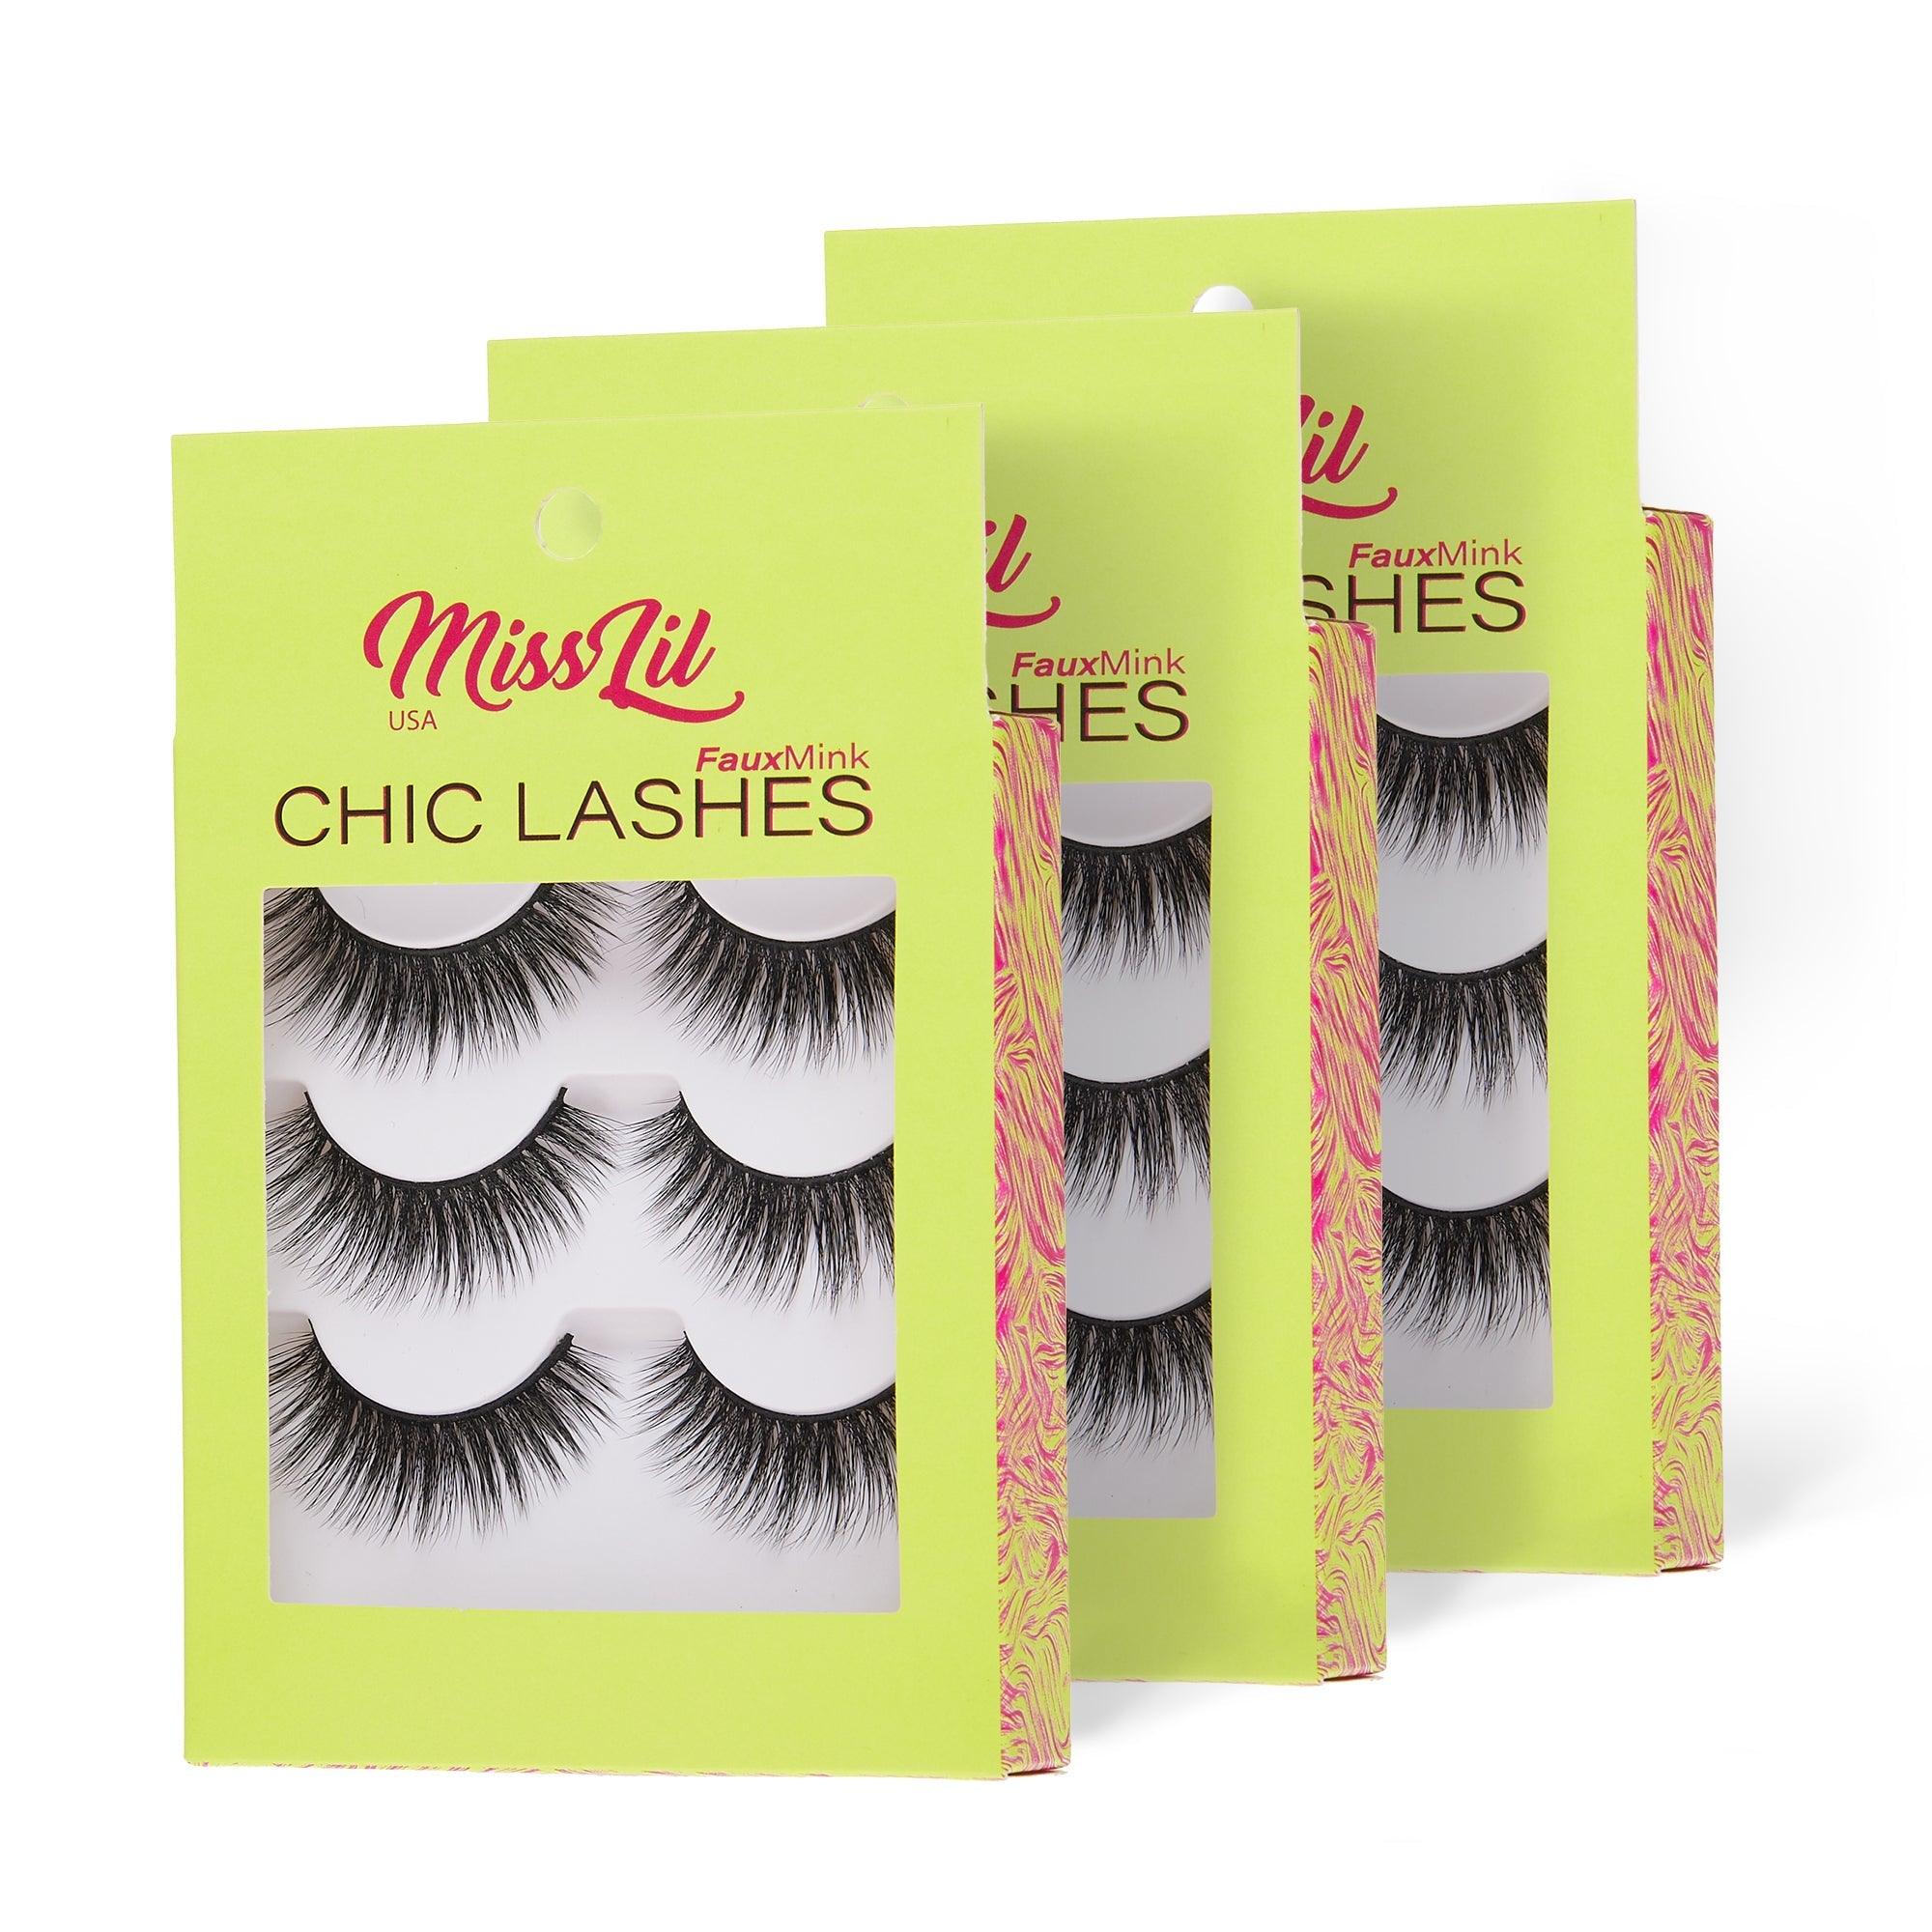 3-Pair Faux Mink Eyelashes - Chic Lashes Collection #38 - Pack of 12 - Miss Lil USA